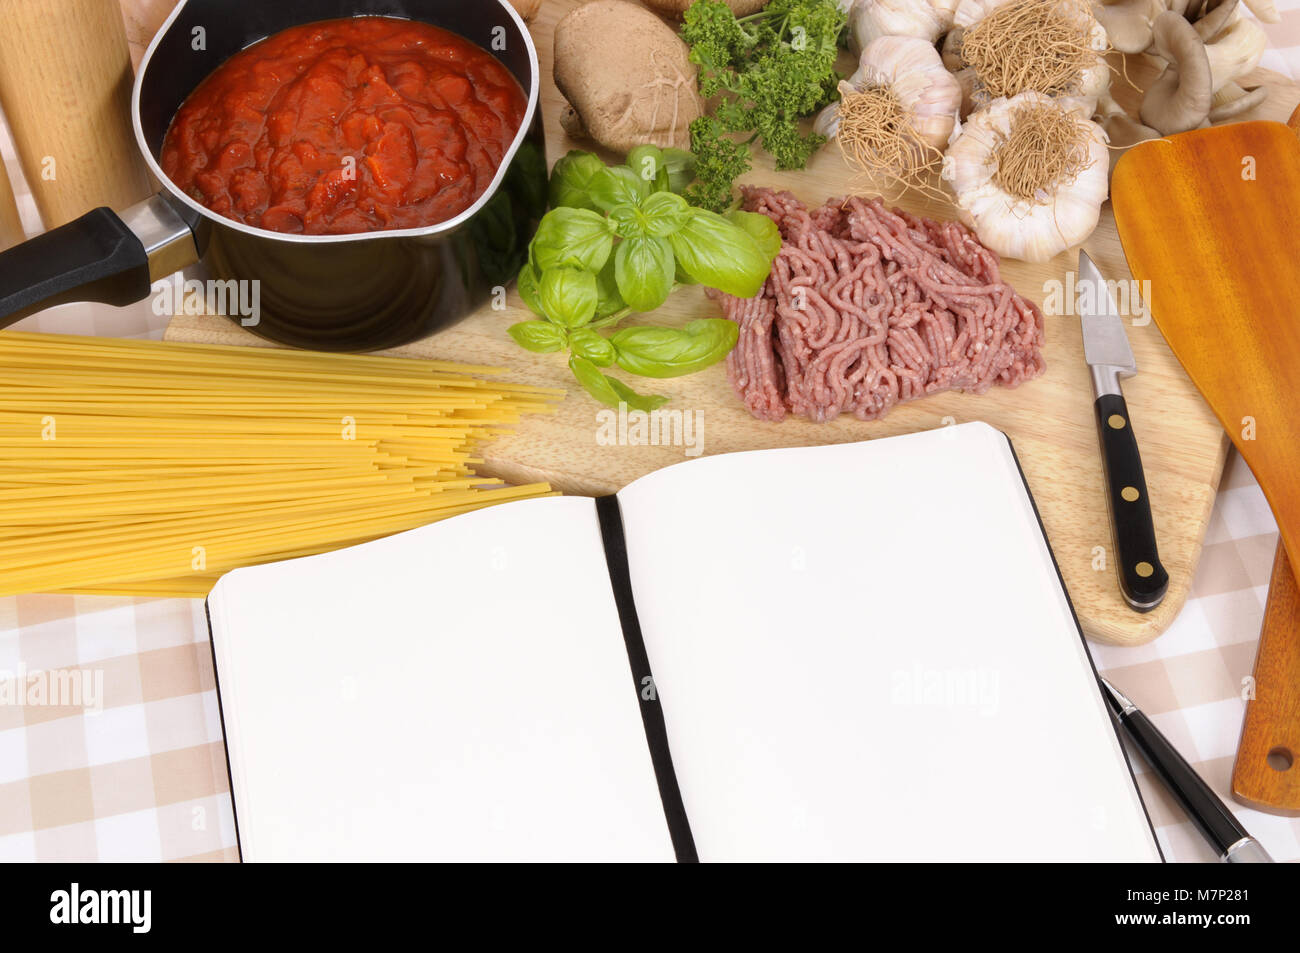 https://c8.alamy.com/comp/M7P281/making-italian-spaghetti-bolognese-with-ingredients-and-blank-recipe-M7P281.jpg